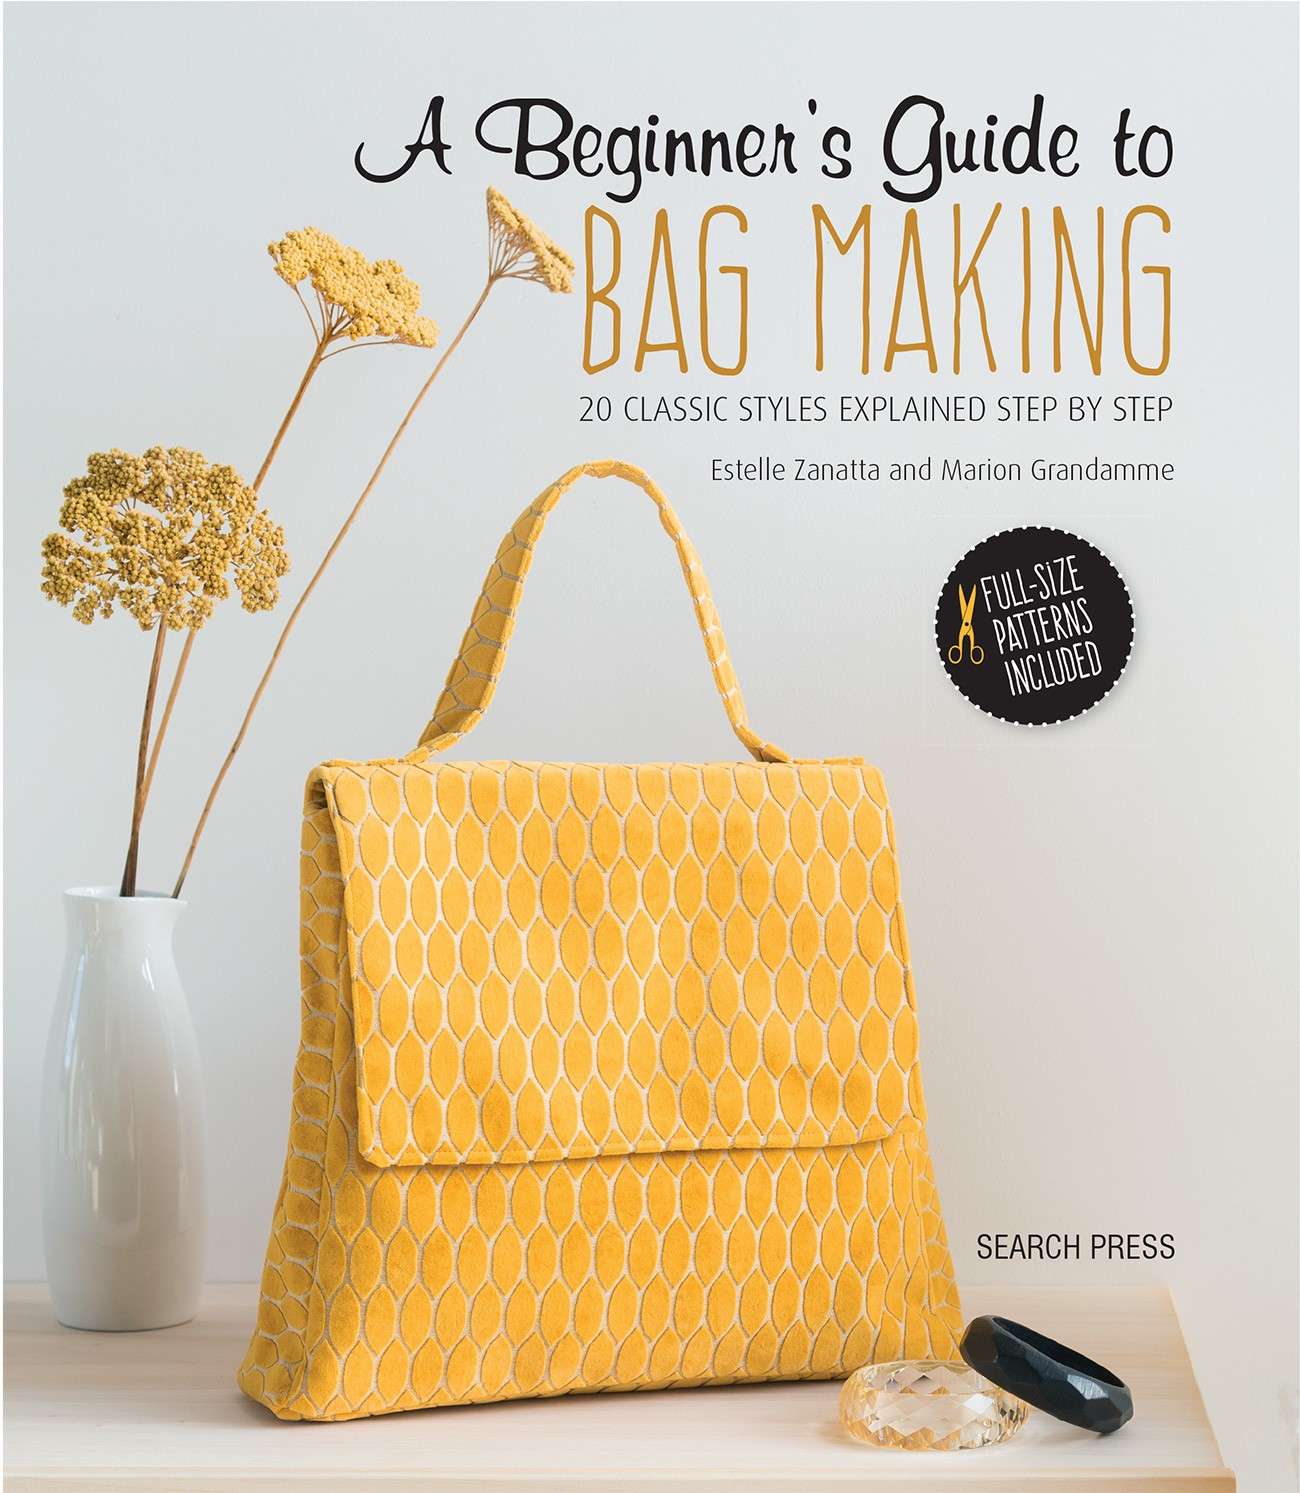 Basic Leather Tote Bag - Build Along Tutorial